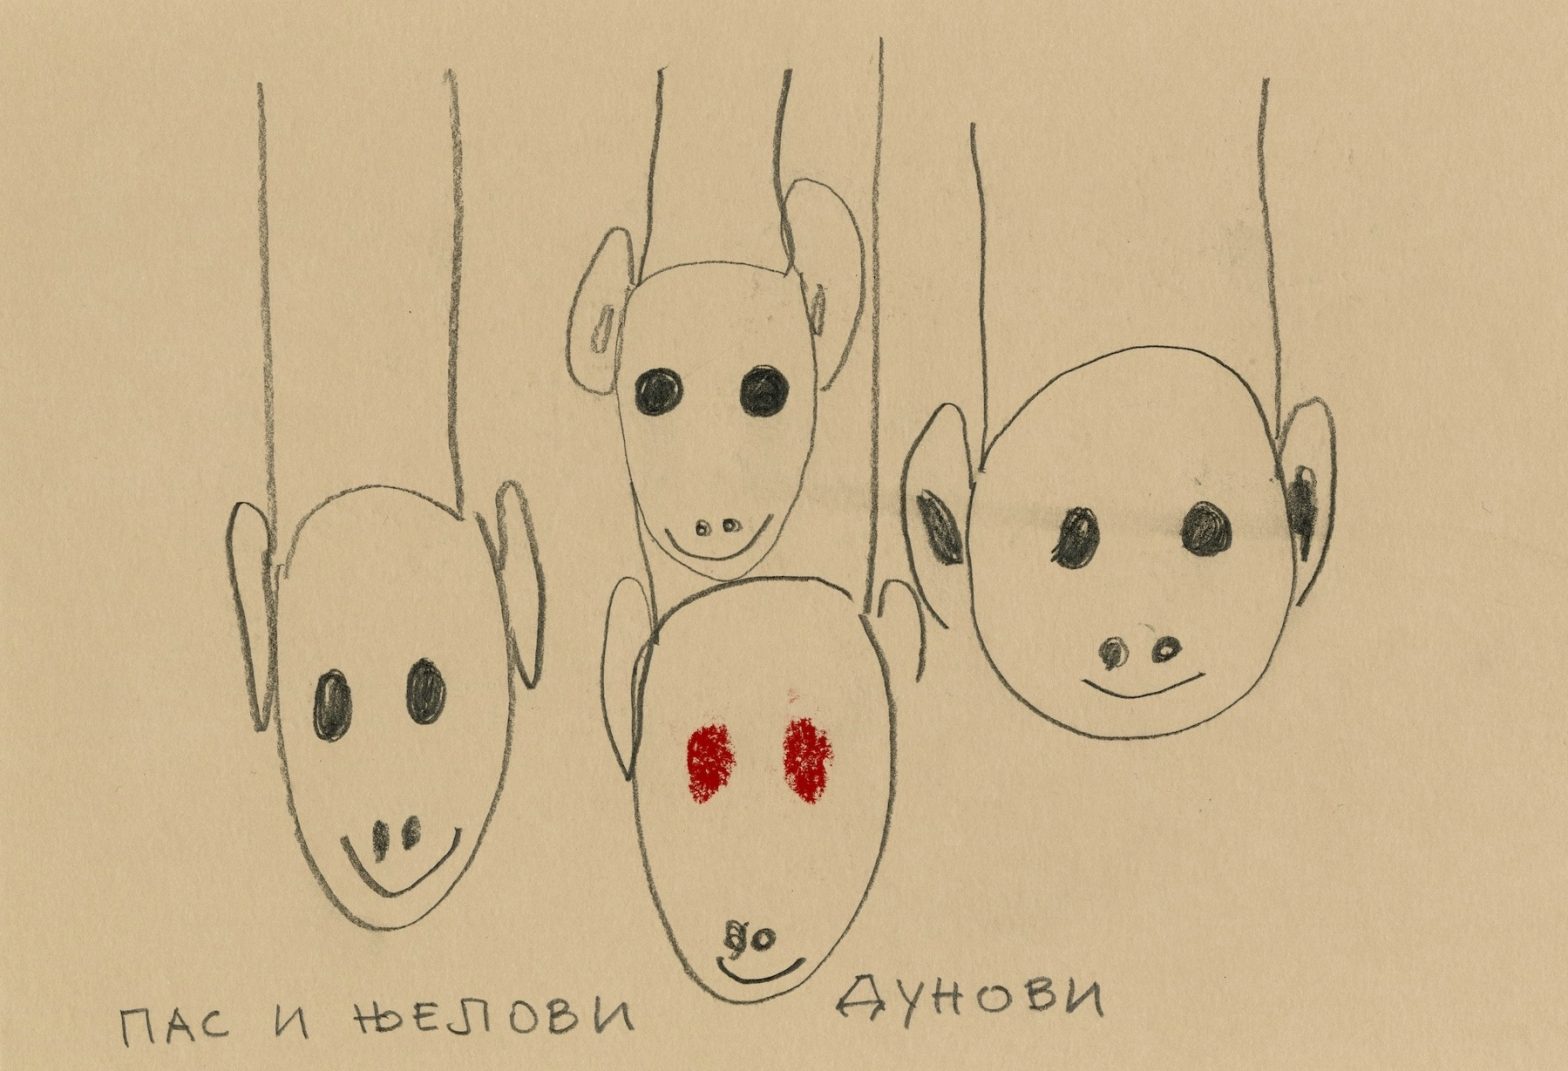 Drawing in black pencil with four smiling animal heads in a naive style, one with red eyes. Words handwritten in Cyrillic translate as: Dog and its spirits.